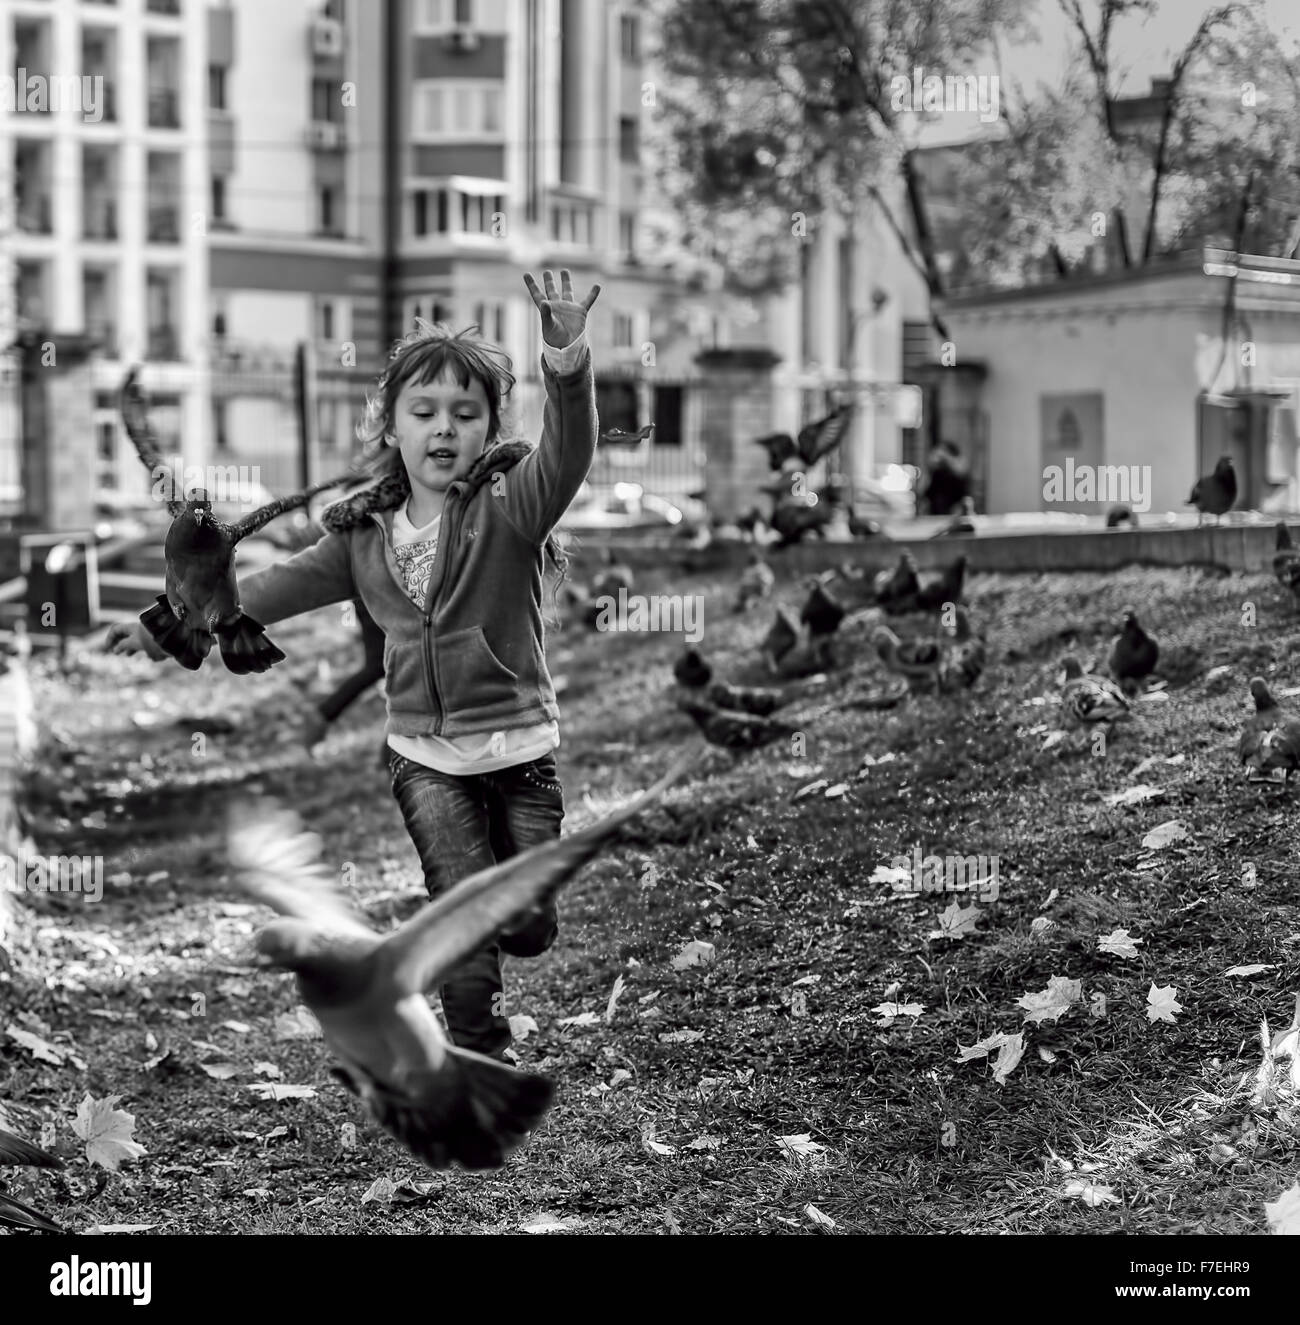 22/09 - Young girl chases pigeons in a local park in Ufa Russia during the Autumn of 2015 September Stock Photo